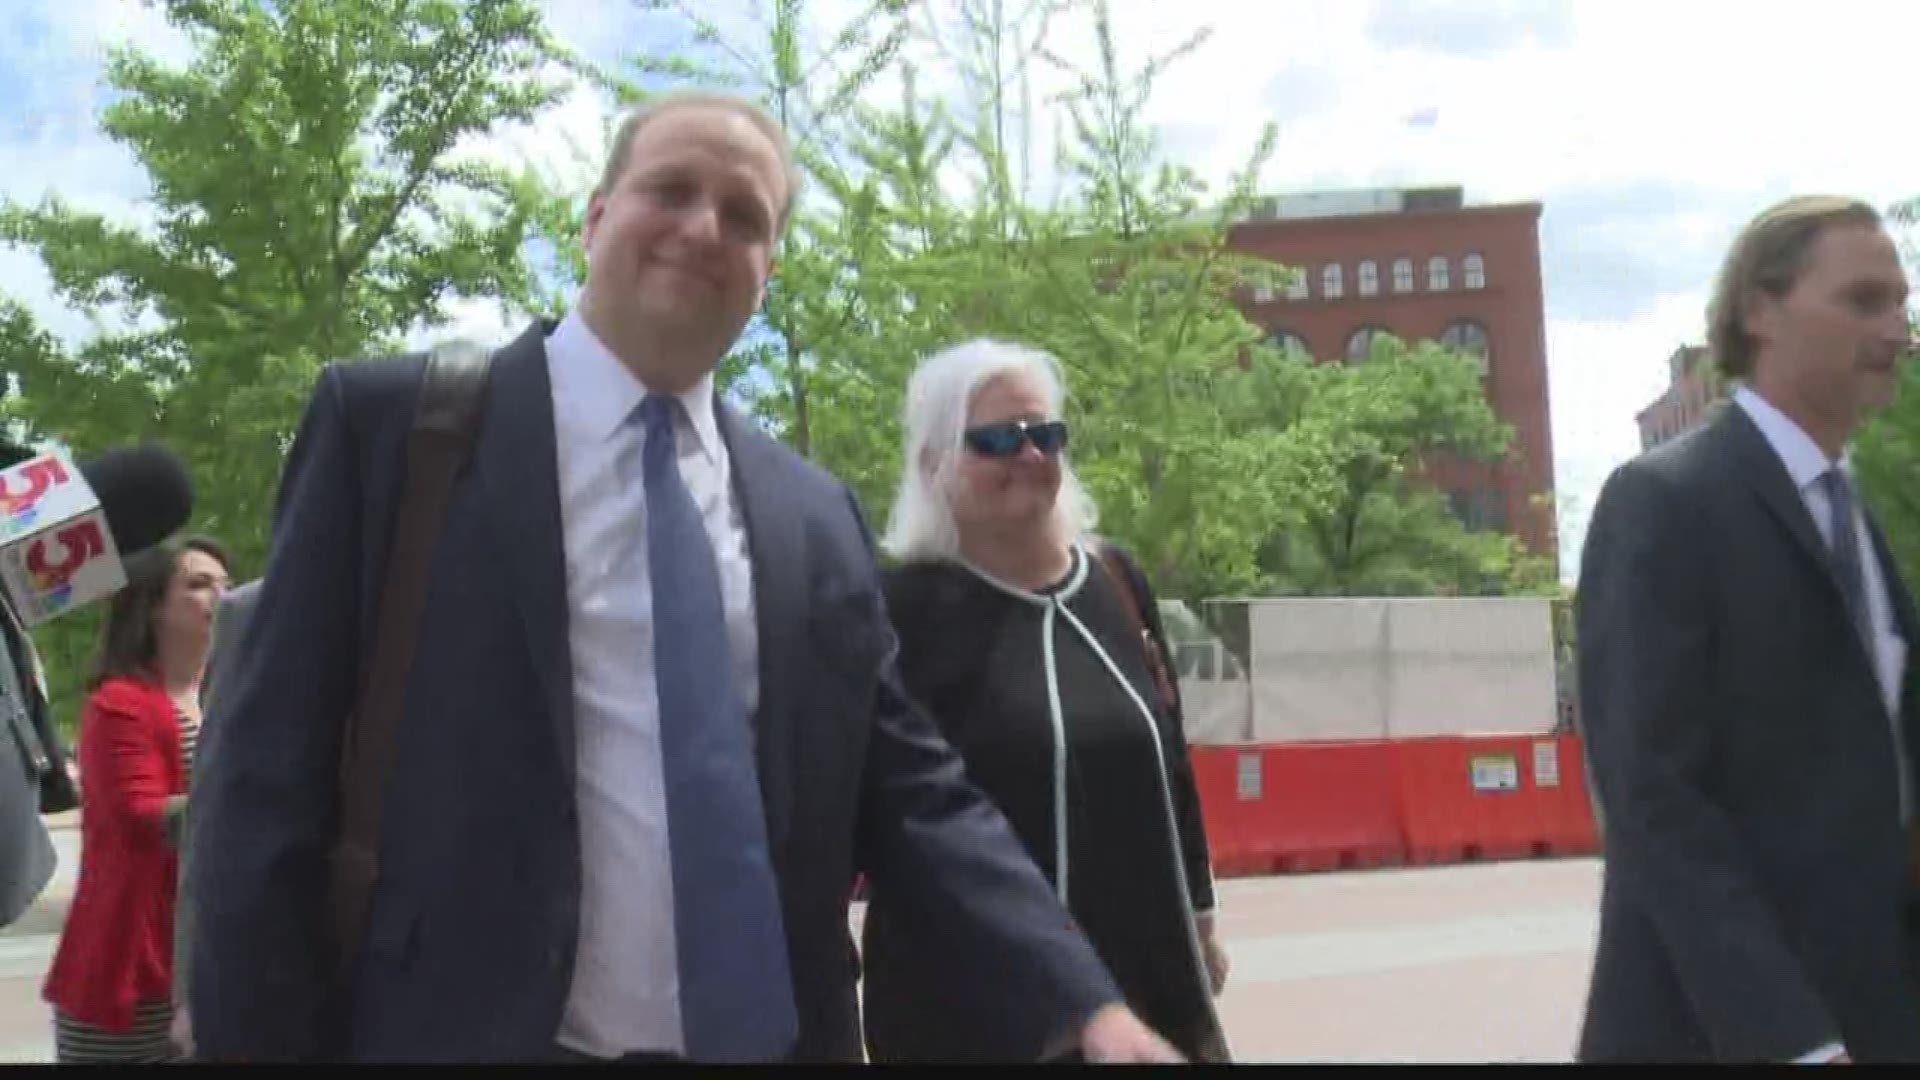 Businessman John Rallo and Stenger appointee Sheila Sweeney appeared in court for their accused involvement in former St. Louis County Executive Steve Stenger's pay-to-play scheme.